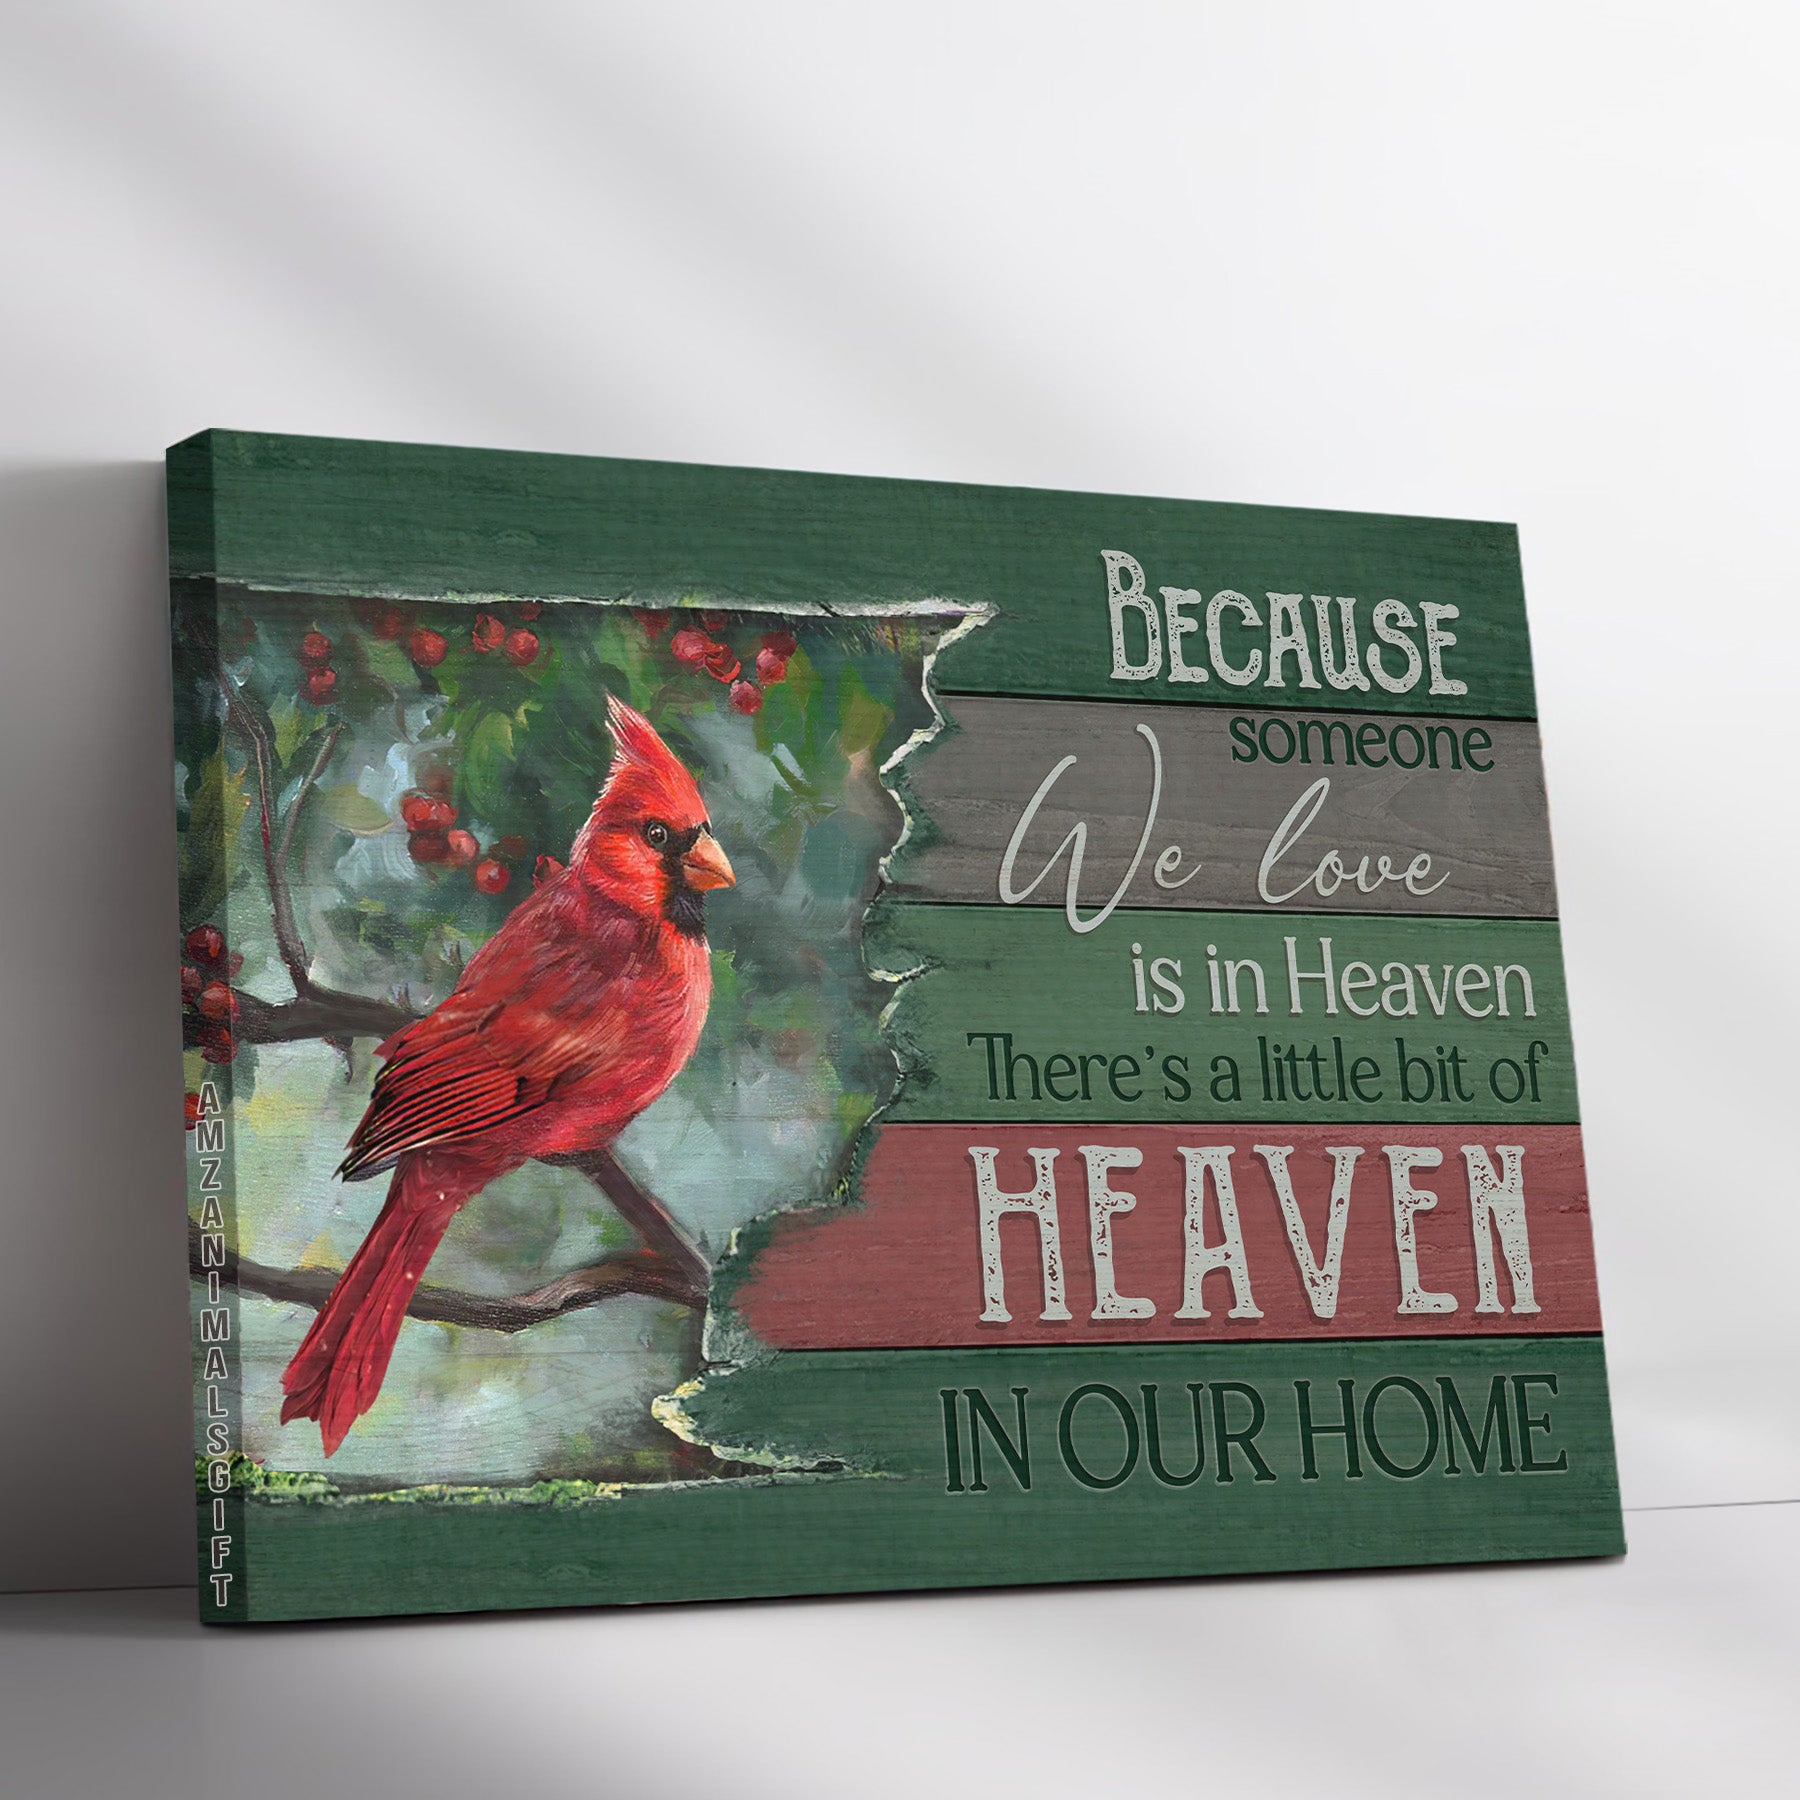 Memorial Premium Wrapped Landscape Canvas - Beautiful Cardinal, Green Forest, Cranberry, Because Someone We Love Is In Heaven - Gift For Members Family